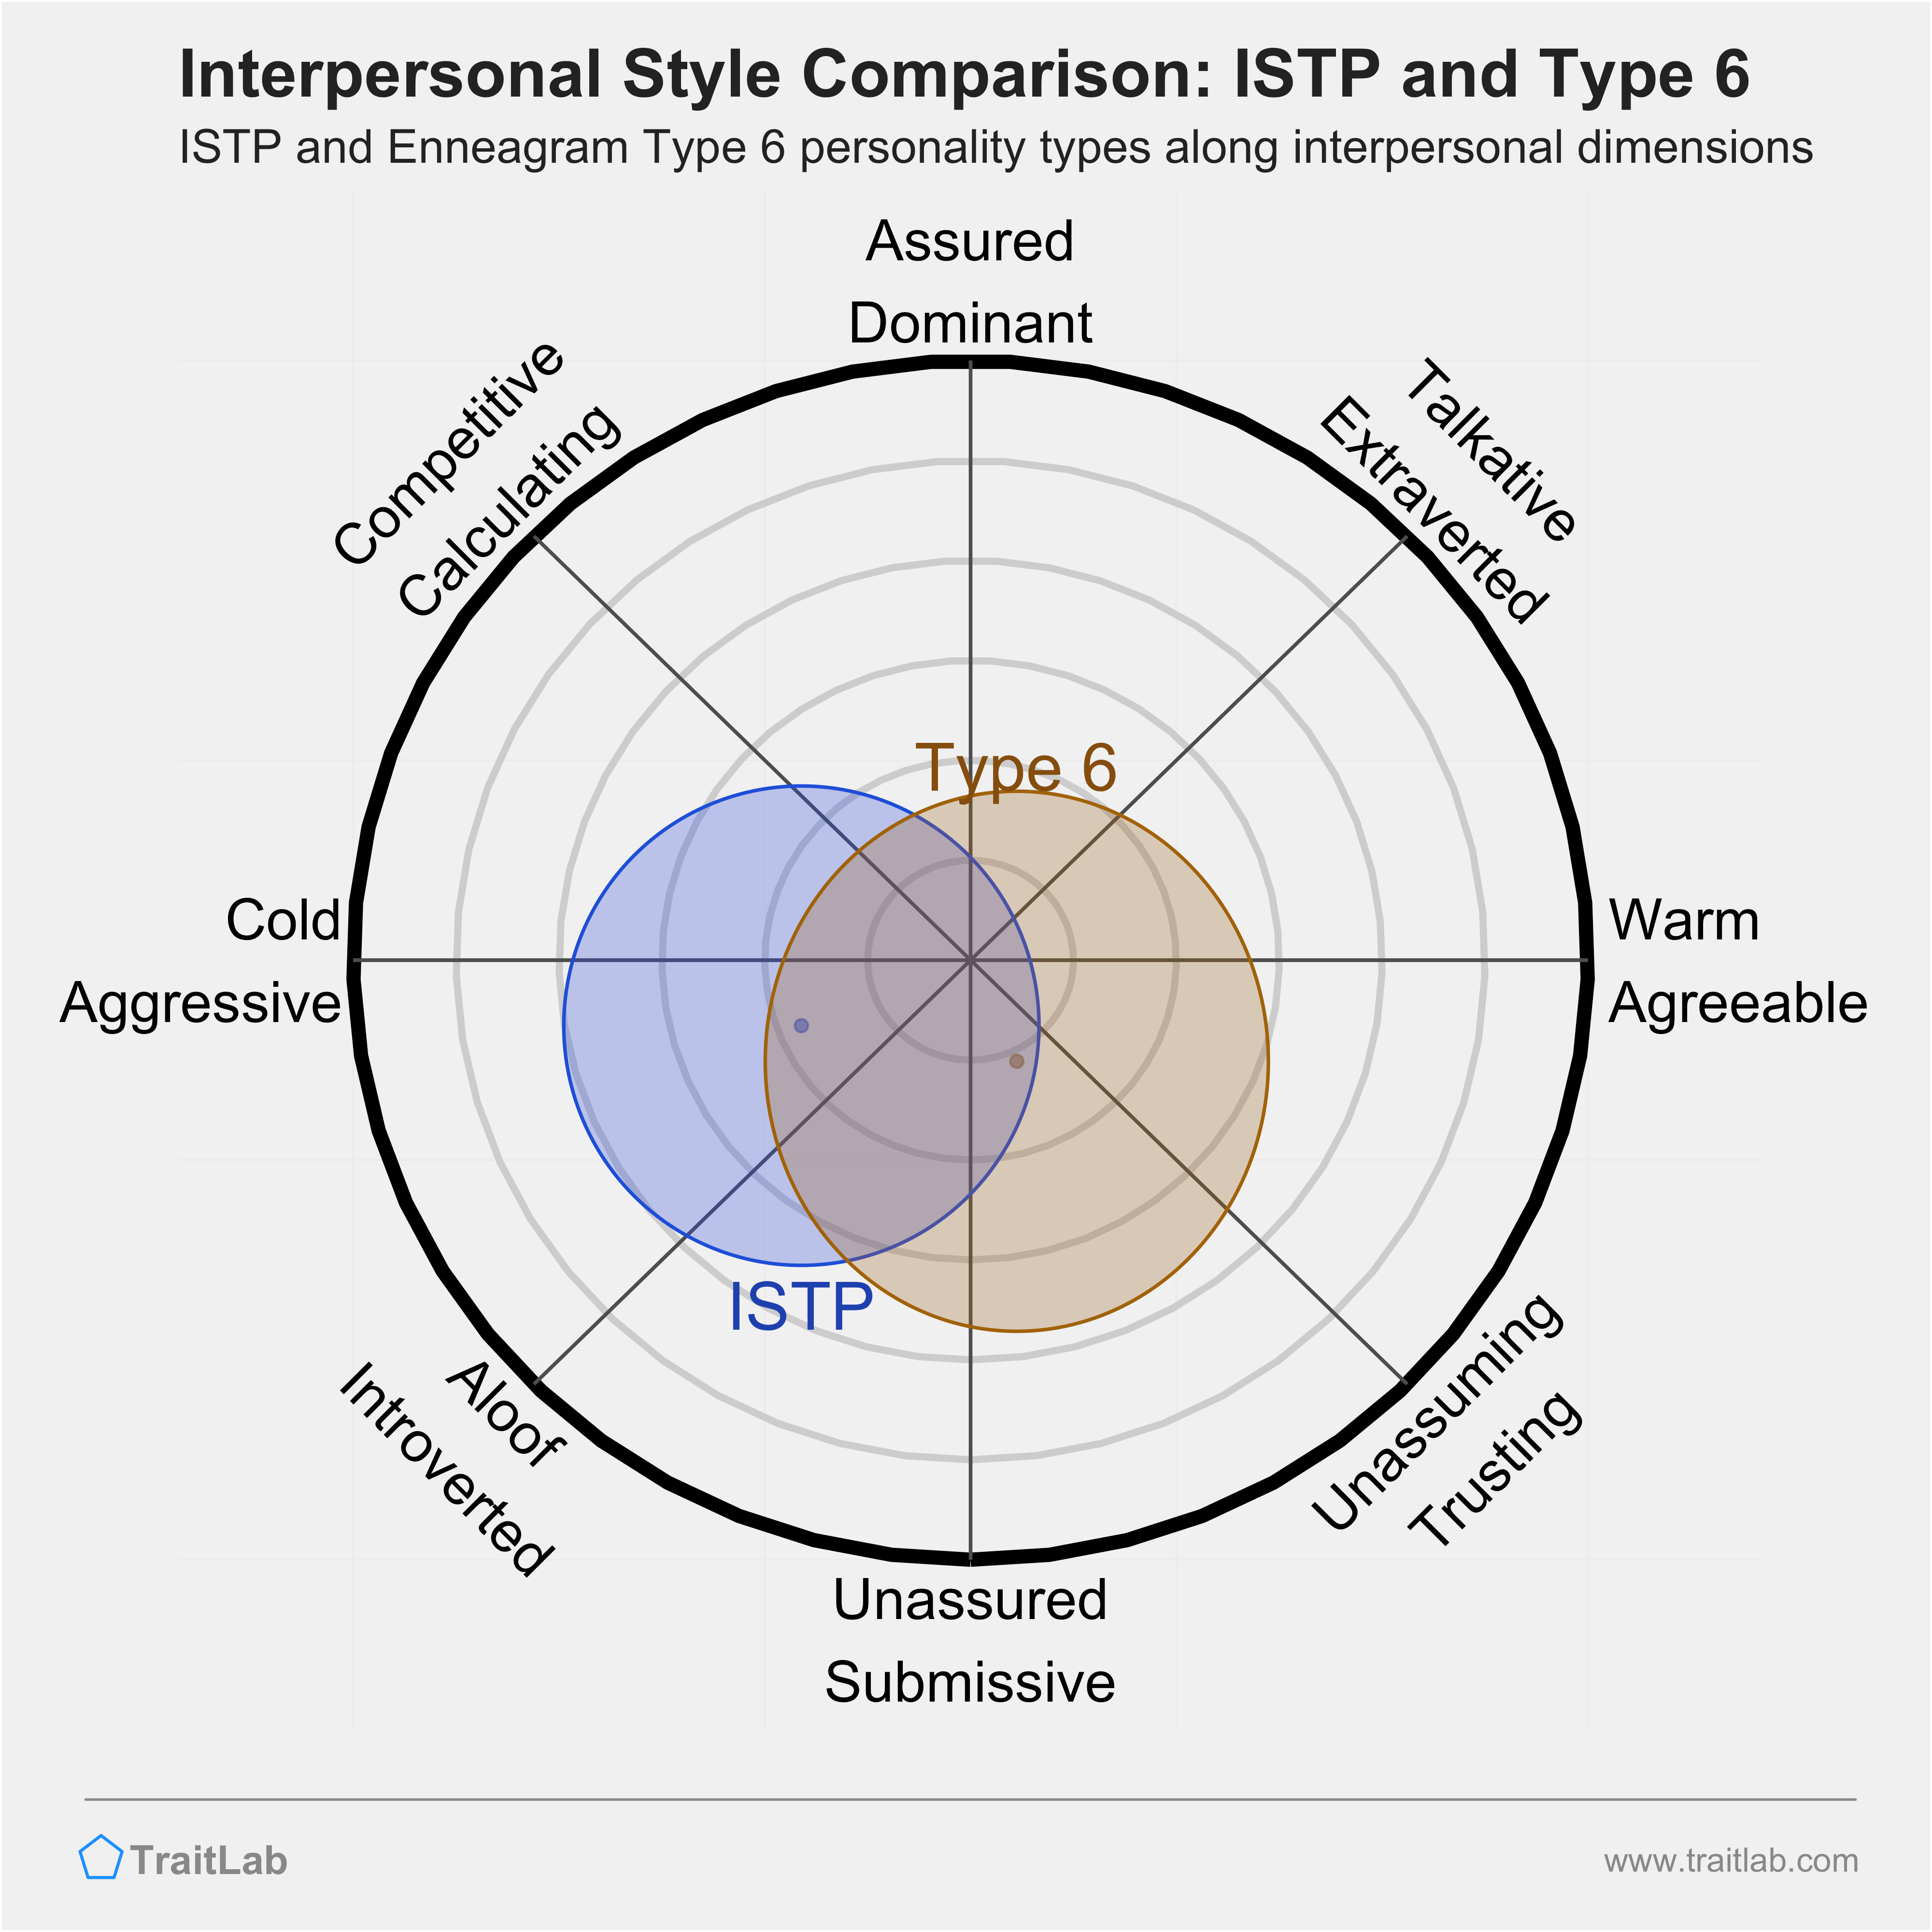 Enneagram ISTP and Type 6 comparison across interpersonal dimensions